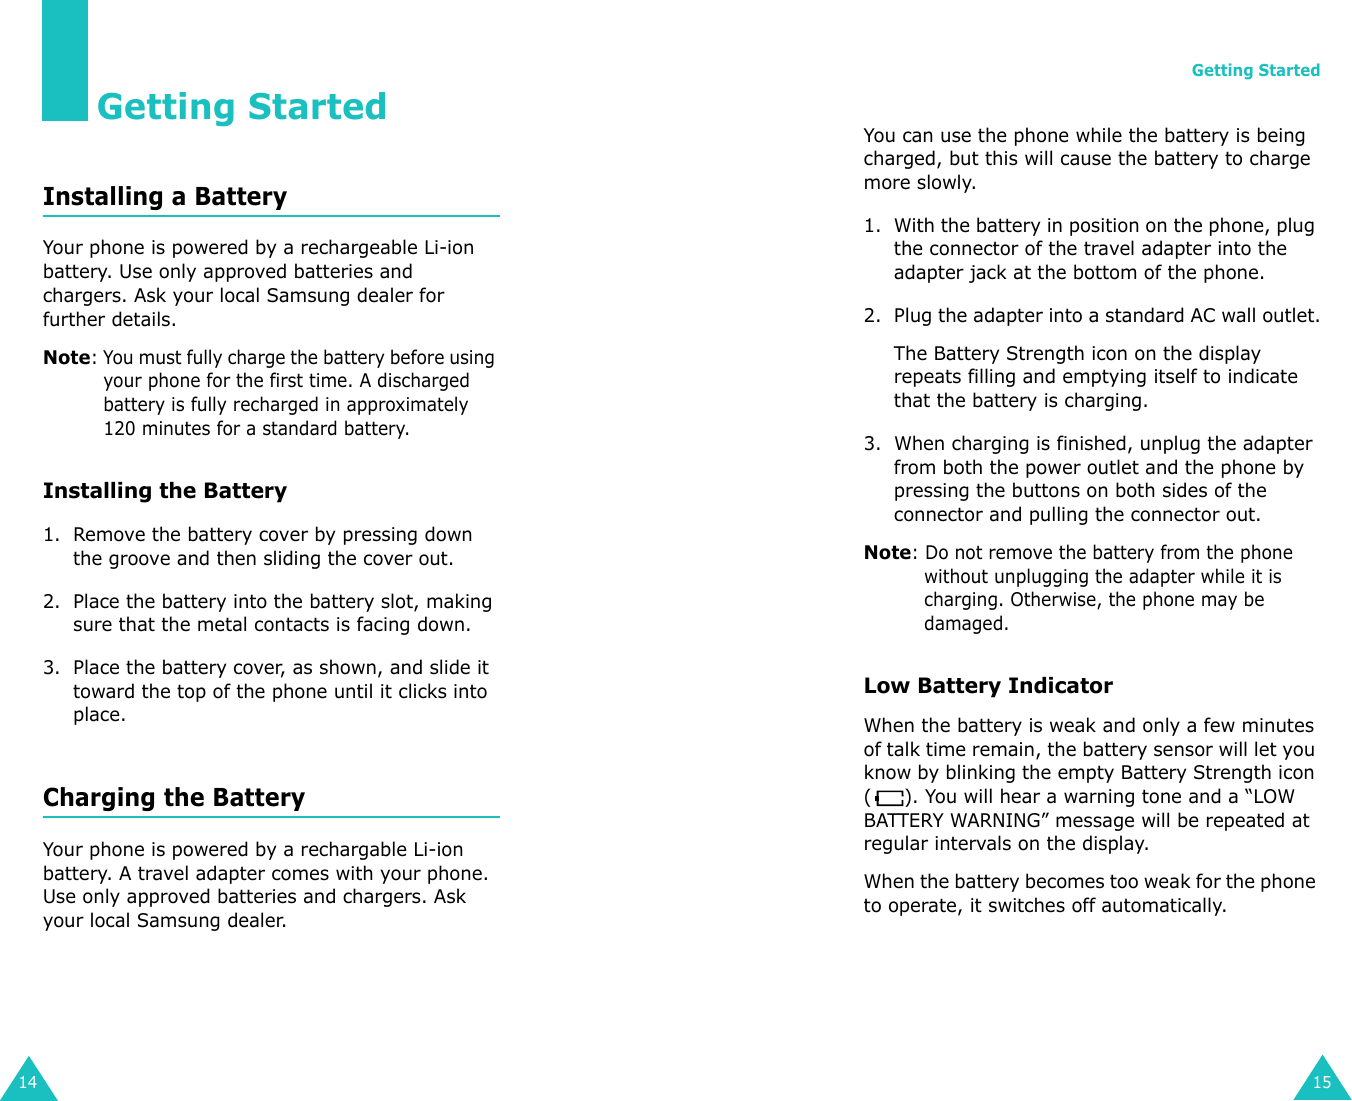 14Getting StartedInstalling a BatteryYour phone is powered by a rechargeable Li-ion battery. Use only approved batteries and chargers. Ask your local Samsung dealer for further details.Note: You must fully charge the battery before using your phone for the first time. A discharged battery is fully recharged in approximately 120 minutes for a standard battery.Installing the Battery1. Remove the battery cover by pressing down the groove and then sliding the cover out.2. Place the battery into the battery slot, making sure that the metal contacts is facing down. 3. Place the battery cover, as shown, and slide it toward the top of the phone until it clicks into place.Charging the BatteryYour phone is powered by a rechargable Li-ion battery. A travel adapter comes with your phone. Use only approved batteries and chargers. Ask your local Samsung dealer.Getting Started15You can use the phone while the battery is being charged, but this will cause the battery to charge more slowly.1. With the battery in position on the phone, plug the connector of the travel adapter into the adapter jack at the bottom of the phone.2. Plug the adapter into a standard AC wall outlet.The Battery Strength icon on the display repeats filling and emptying itself to indicate that the battery is charging.3. When charging is finished, unplug the adapter from both the power outlet and the phone by pressing the buttons on both sides of the connector and pulling the connector out.Note: Do not remove the battery from the phone without unplugging the adapter while it is charging. Otherwise, the phone may be damaged.Low Battery IndicatorWhen the battery is weak and only a few minutes of talk time remain, the battery sensor will let you know by blinking the empty Battery Strength icon ( ). You will hear a warning tone and a “LOW BATTERY WARNING” message will be repeated at regular intervals on the display. When the battery becomes too weak for the phone to operate, it switches off automatically.